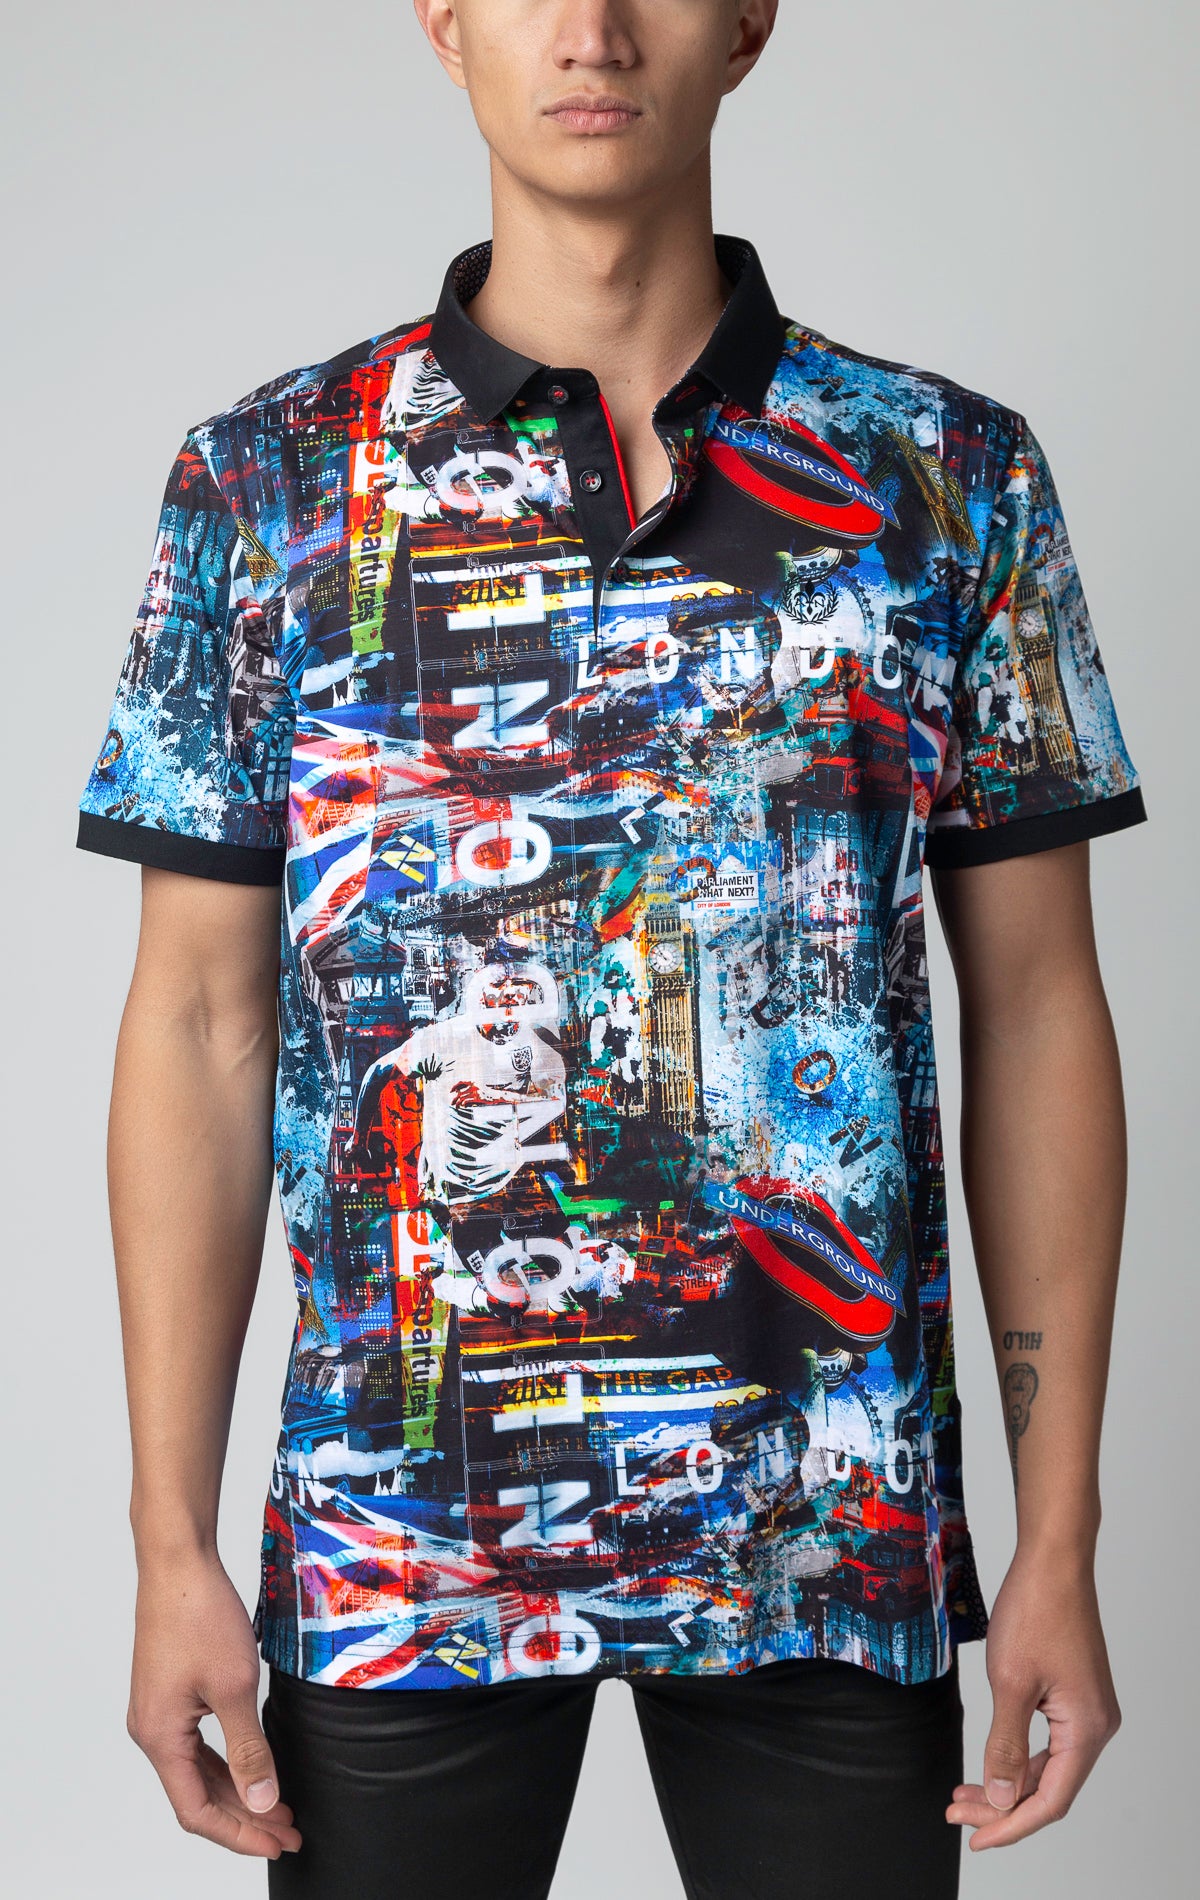  men's casual dress polo shirt . Featuring contrasting patterns and intricate embroidery details